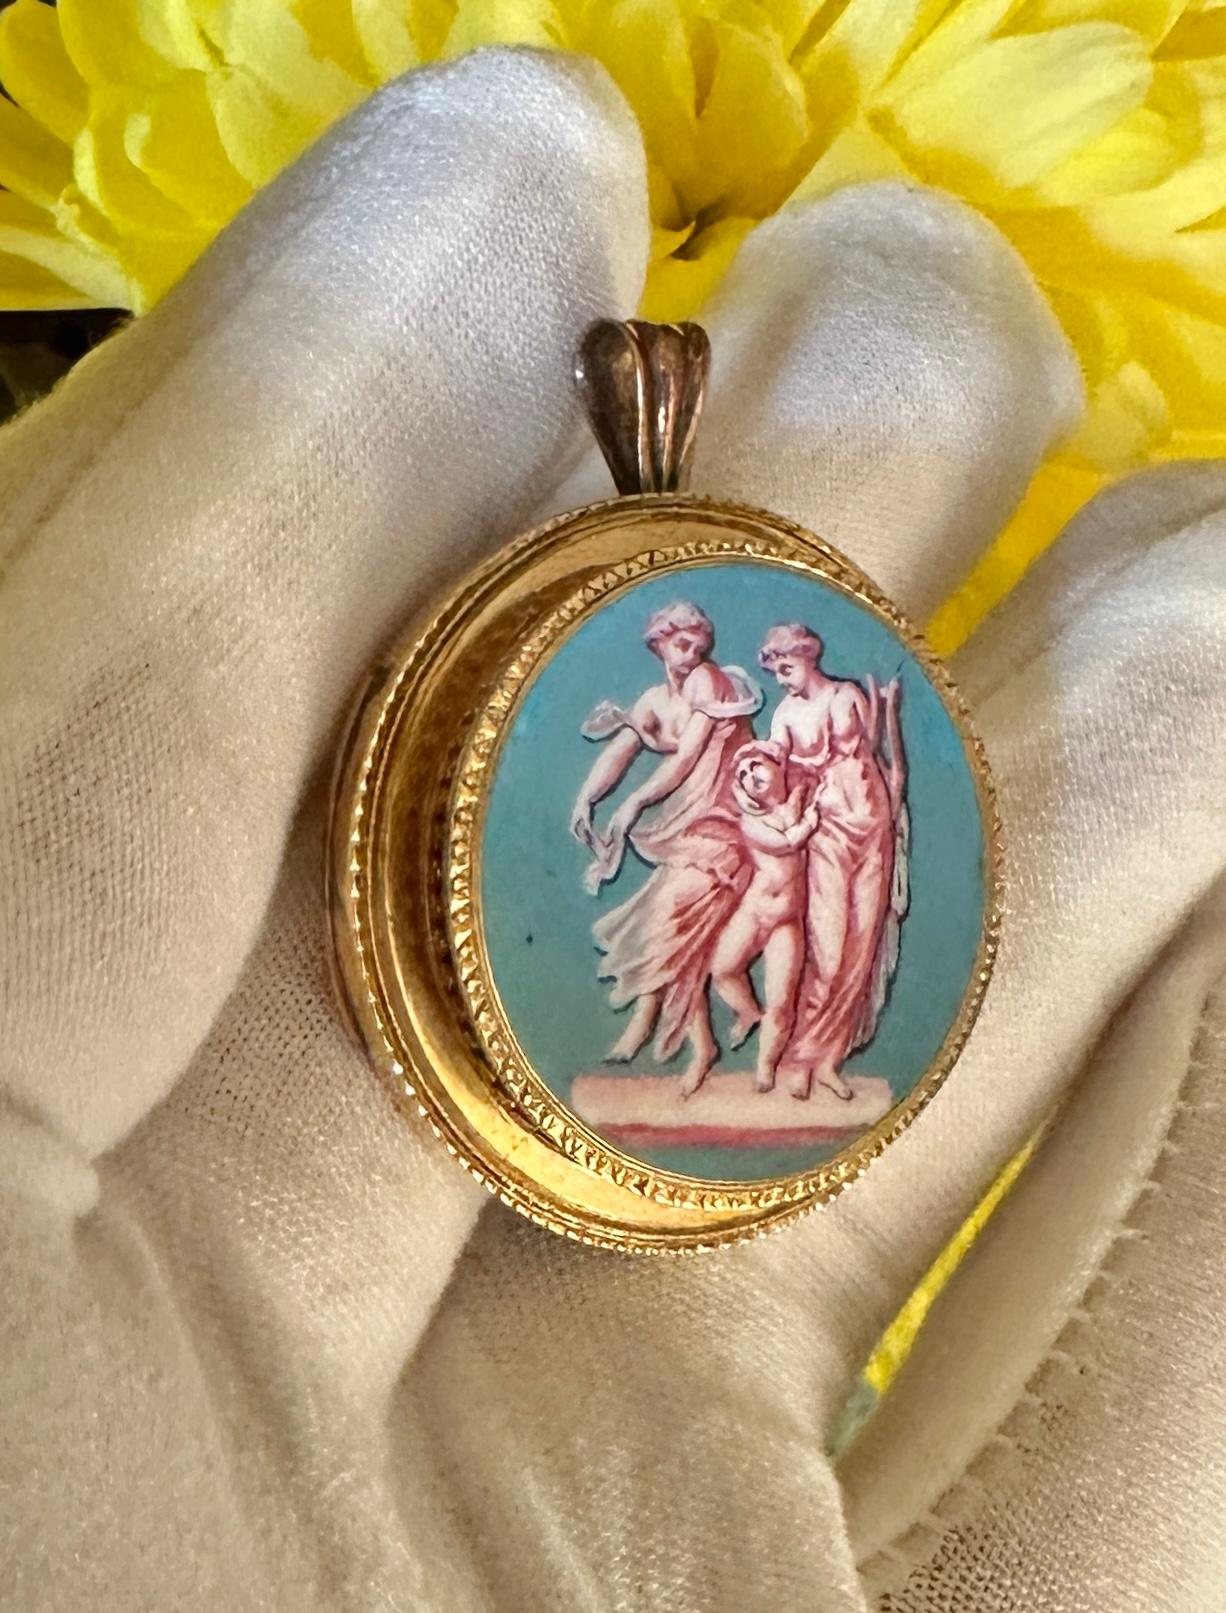 Goddess Cherub Enamel Pendant Necklace Neoclassical Etruscan Revival 18 Karat  In Good Condition For Sale In New York, NY